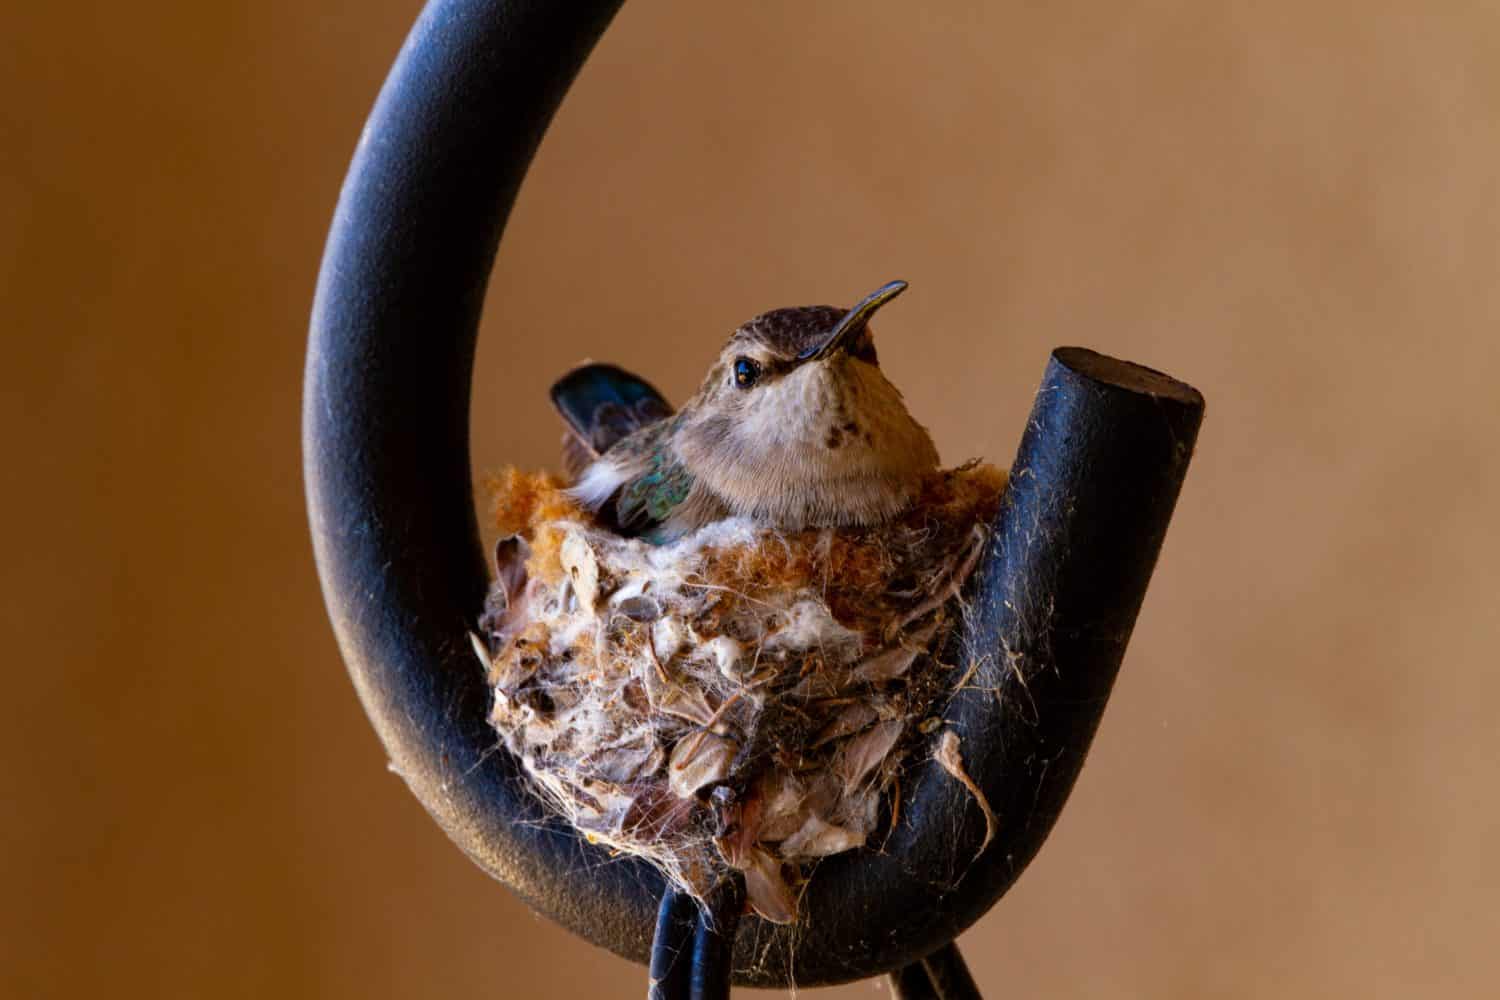 Patio planter hanger hook is home base for female hummingbird and tiny nest in civilization and nature concept